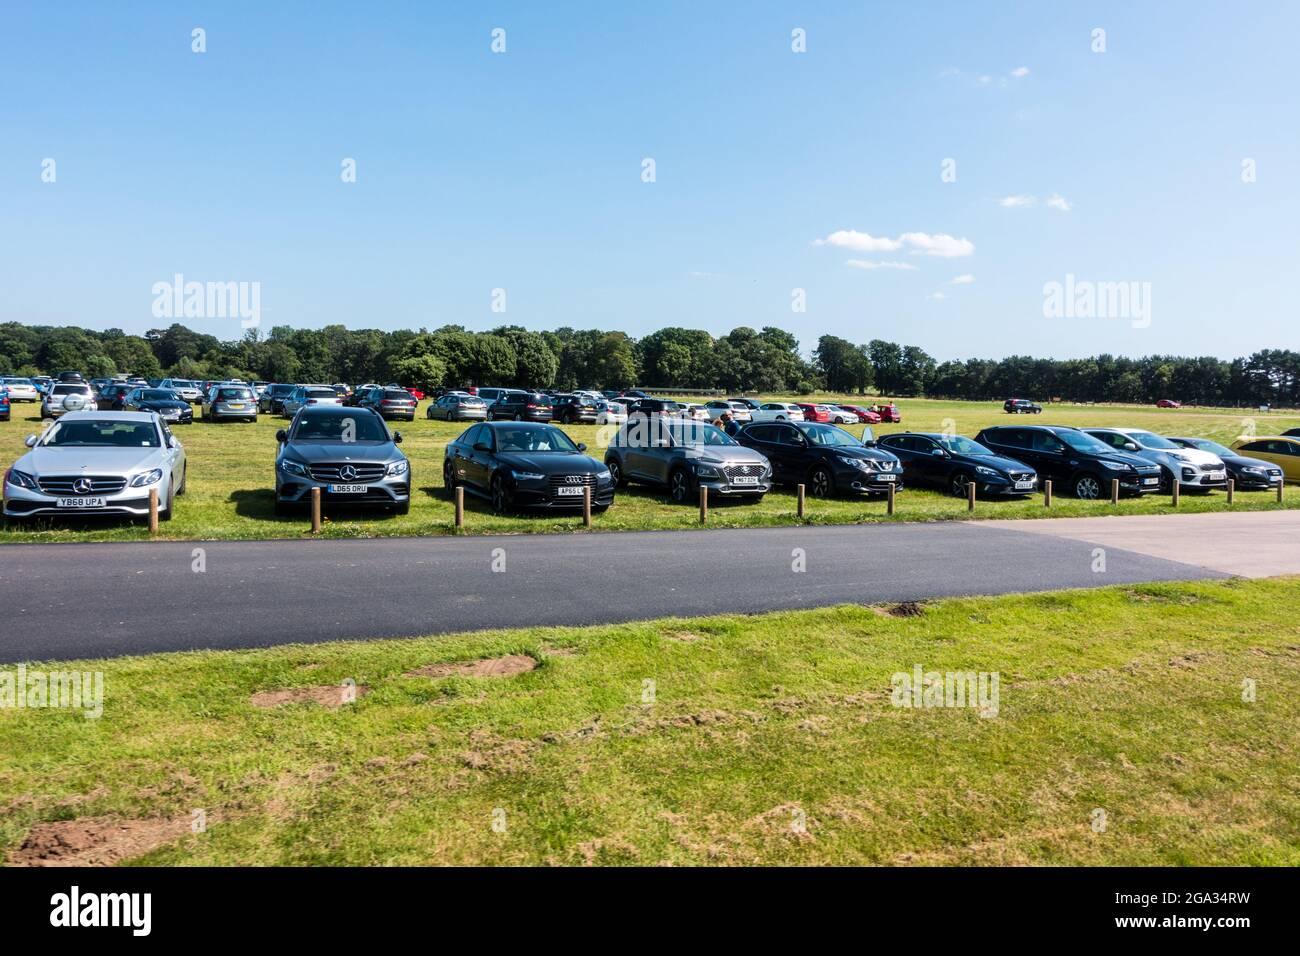 Large group of cars parked on grass verge Stock Photo